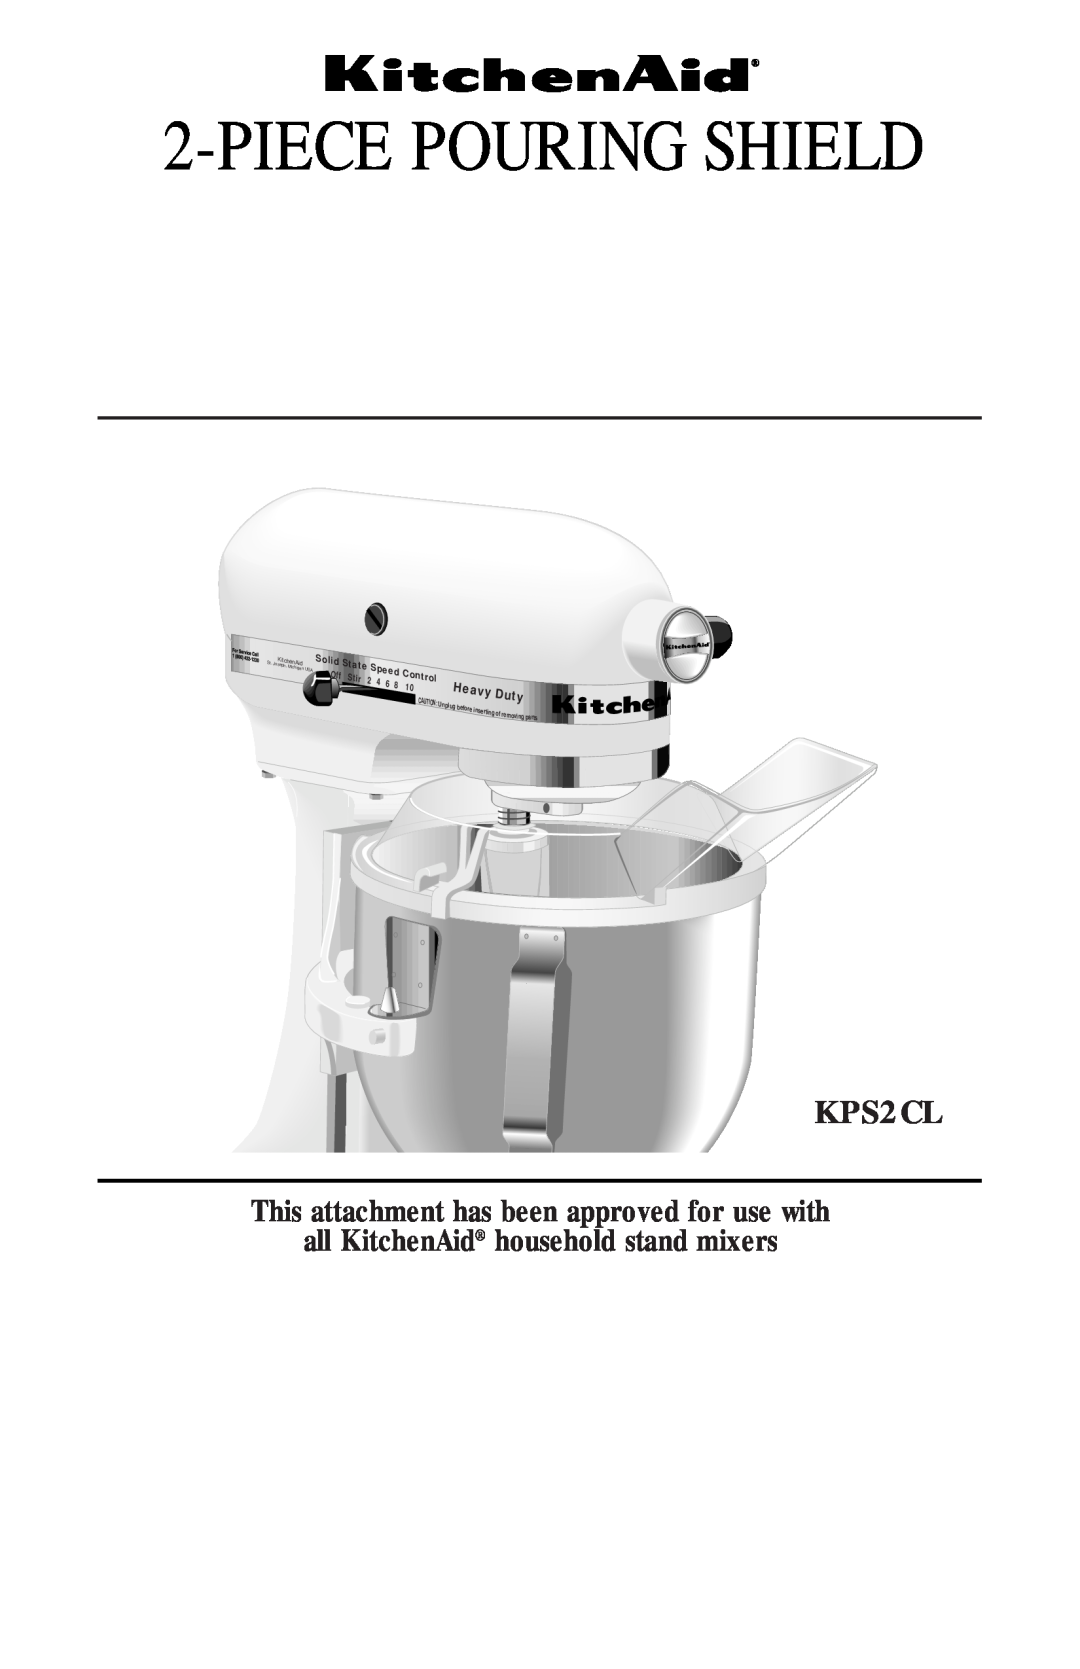 KitchenAid KPS2CL manual This attachment has been approved for use with, all KitchenAid household stand mixers, Duty, Stir 